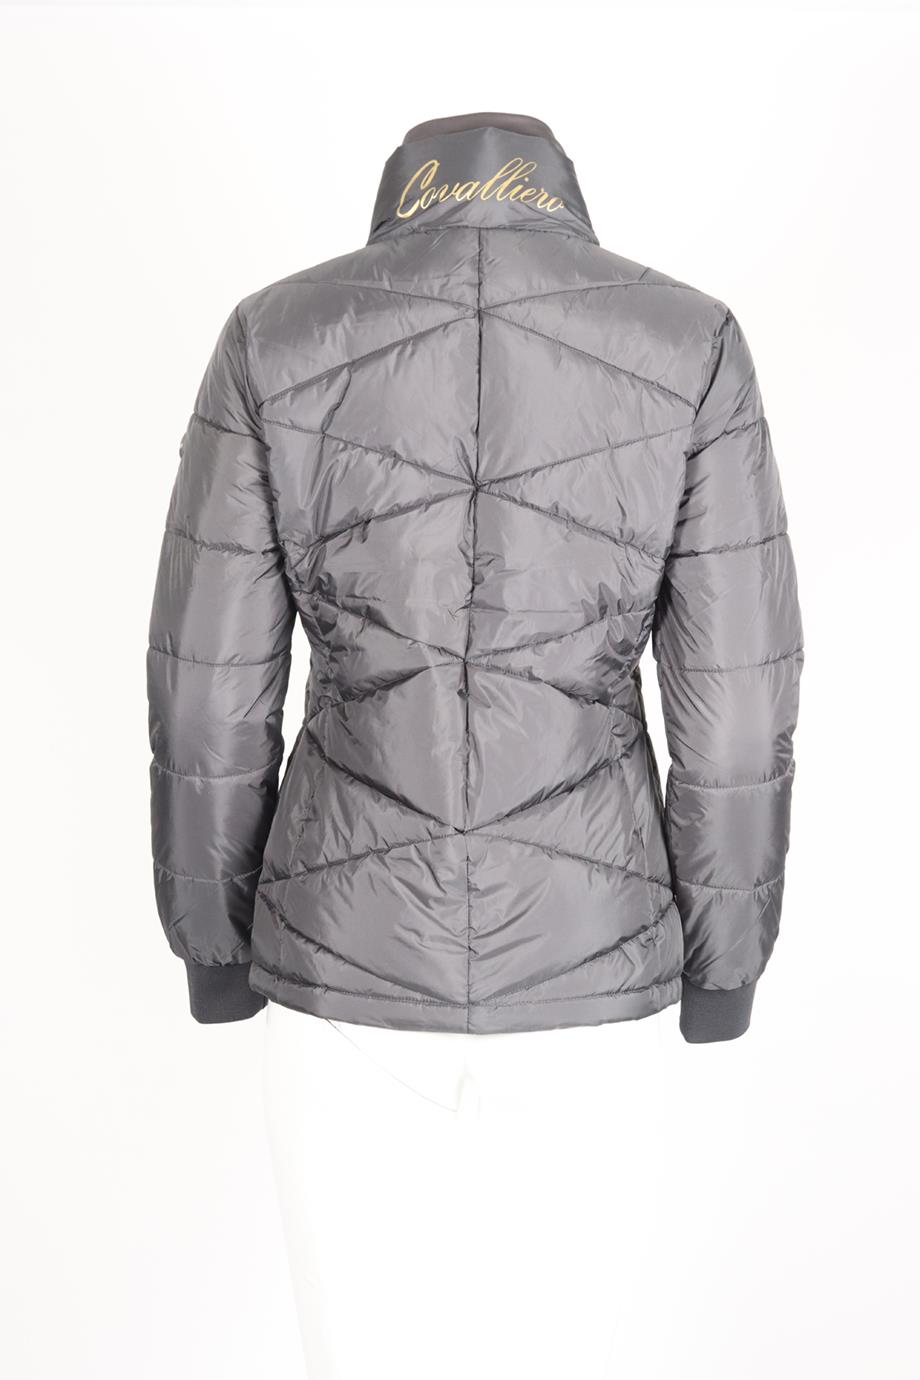 COVLLIERO QUILTED PADDED SHELL JACKET FR 36 UK 8